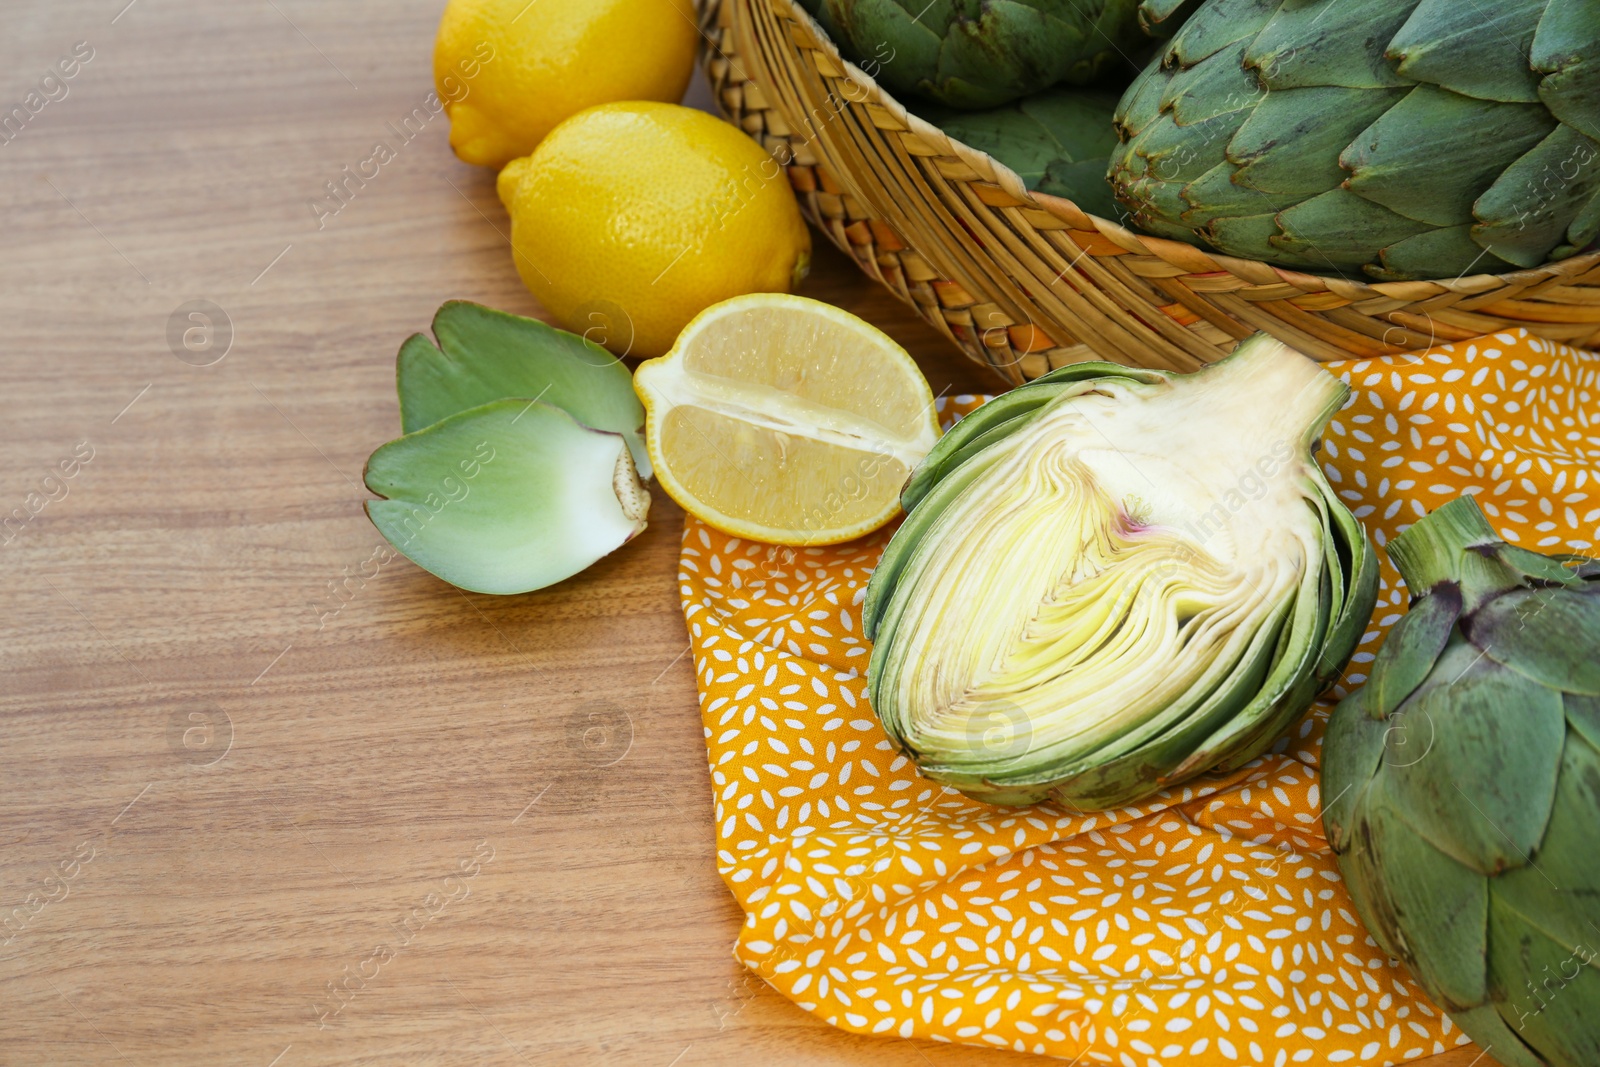 Photo of Tasty artichokes and lemons on wooden table